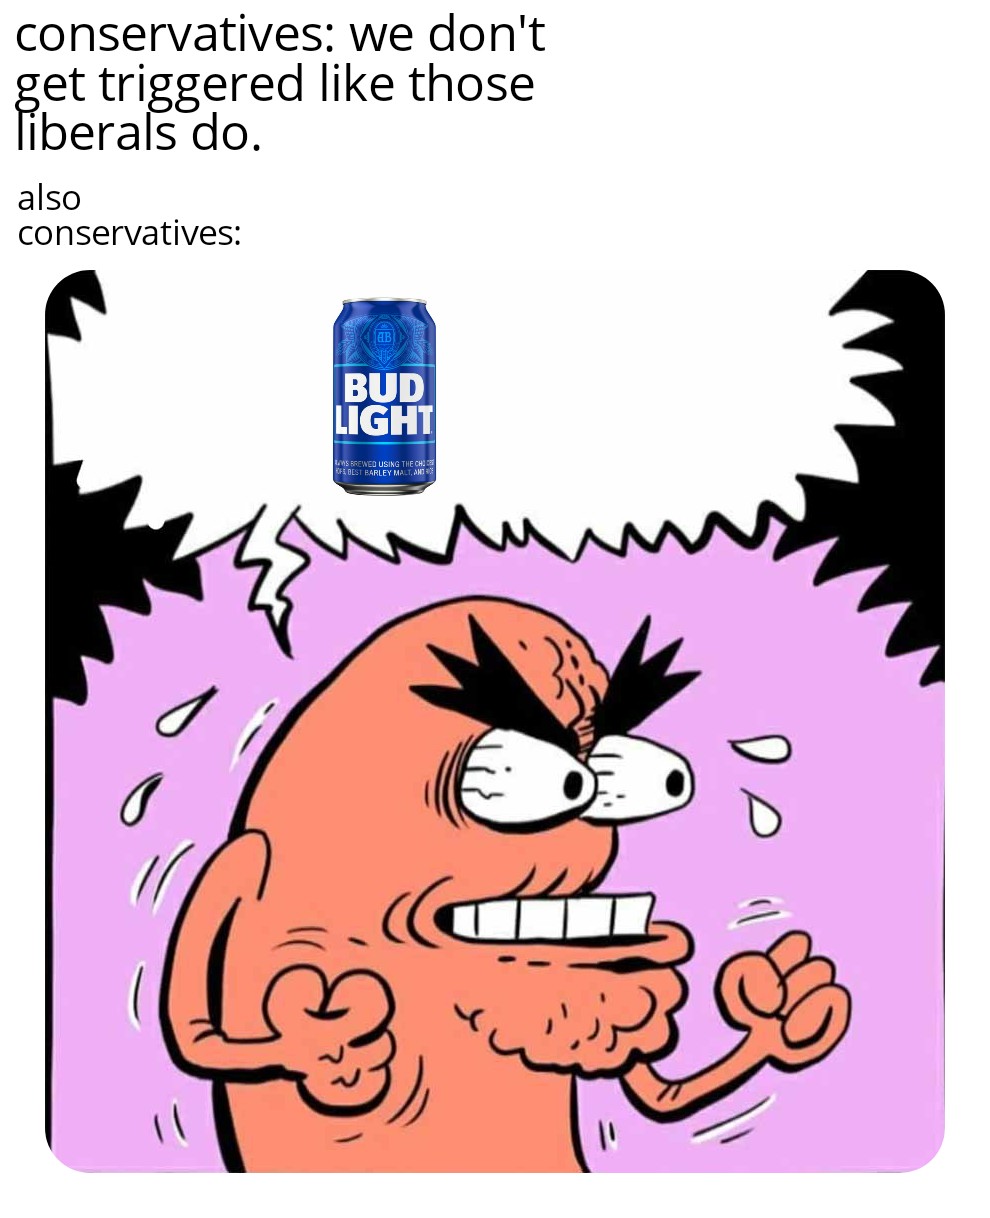 budlight memes - cartoon - conservatives get triggered liberals do. also conservatives we don't those Bud Light Lws Brewed Using The Cho Kofe Best Barley Malt, And fo um De "l